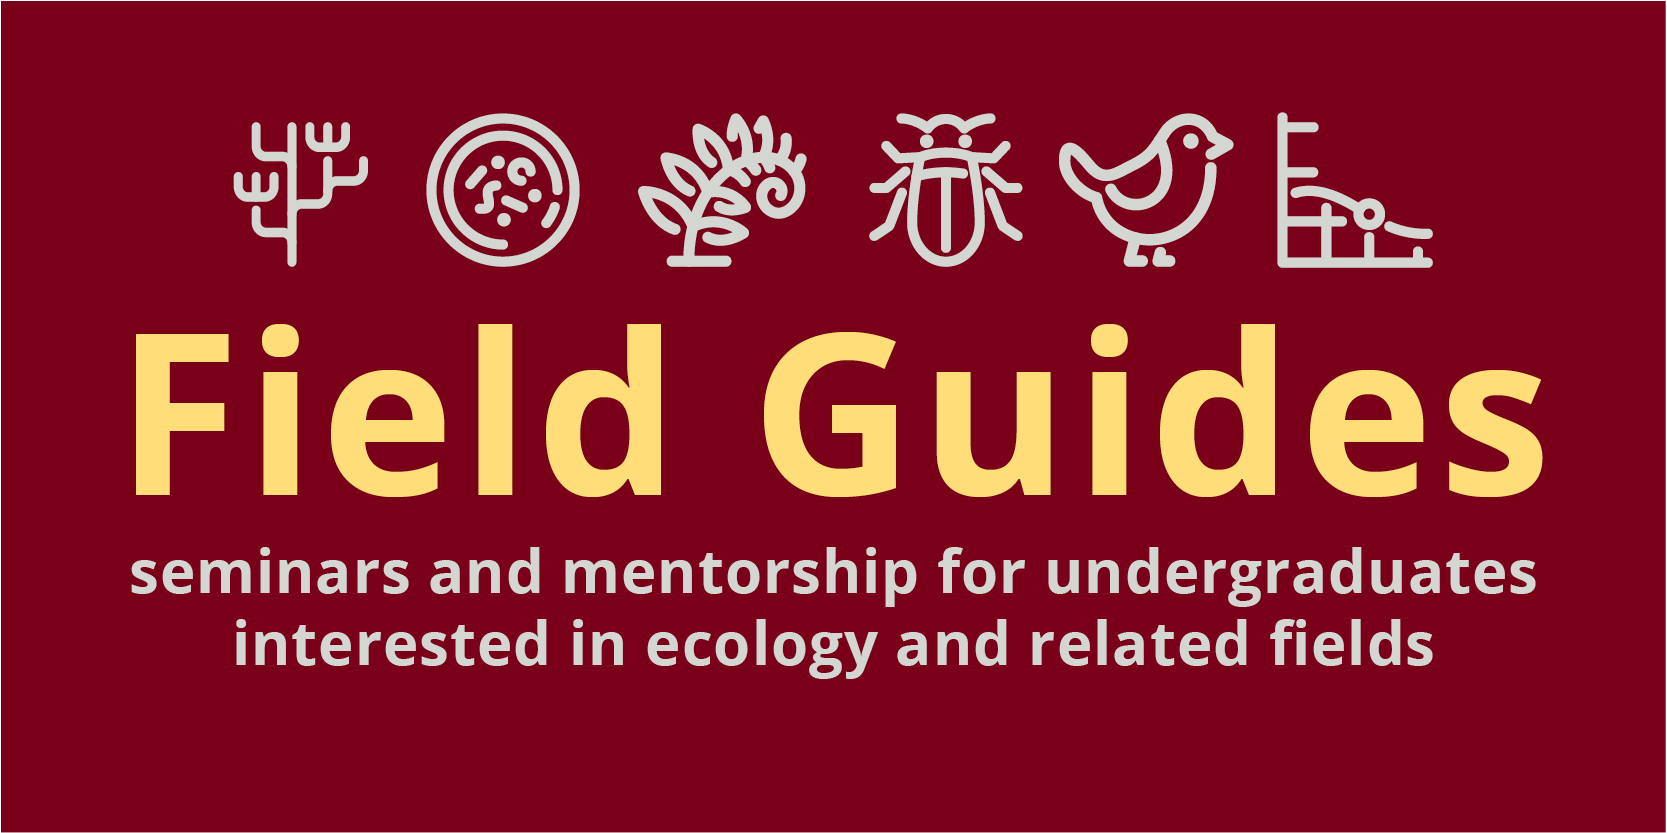 Field Guides - seminars and mentorship for undergraduates interested in ecology and related fields